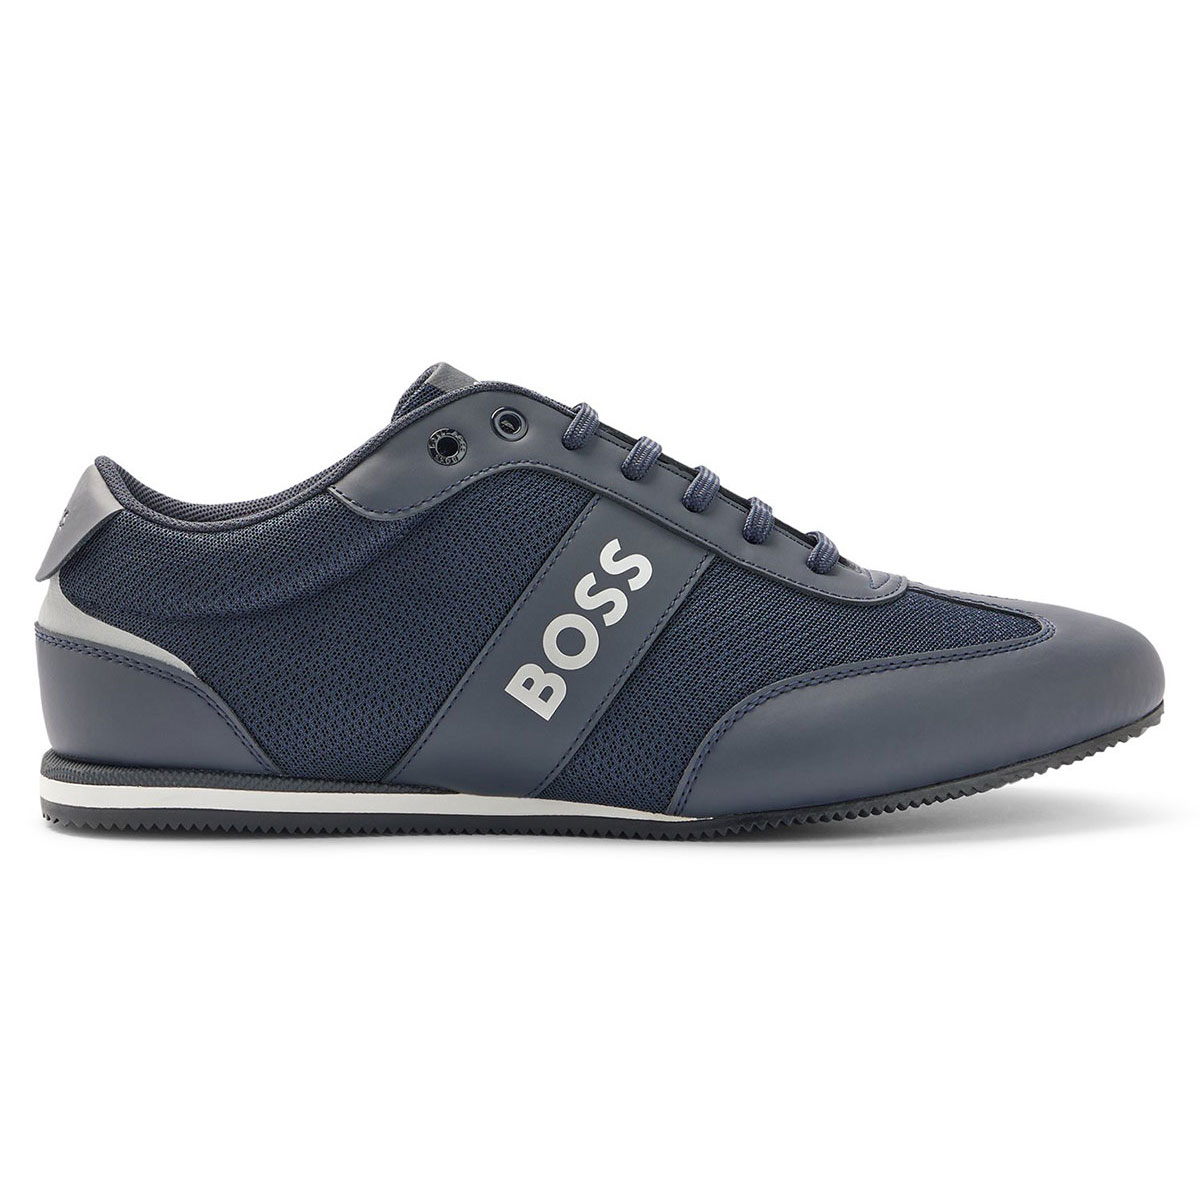 Colonial Produktionscenter Kalkun Hugo Boss Men's Rusham Low-Profile MXME Golf Trainers from american golf